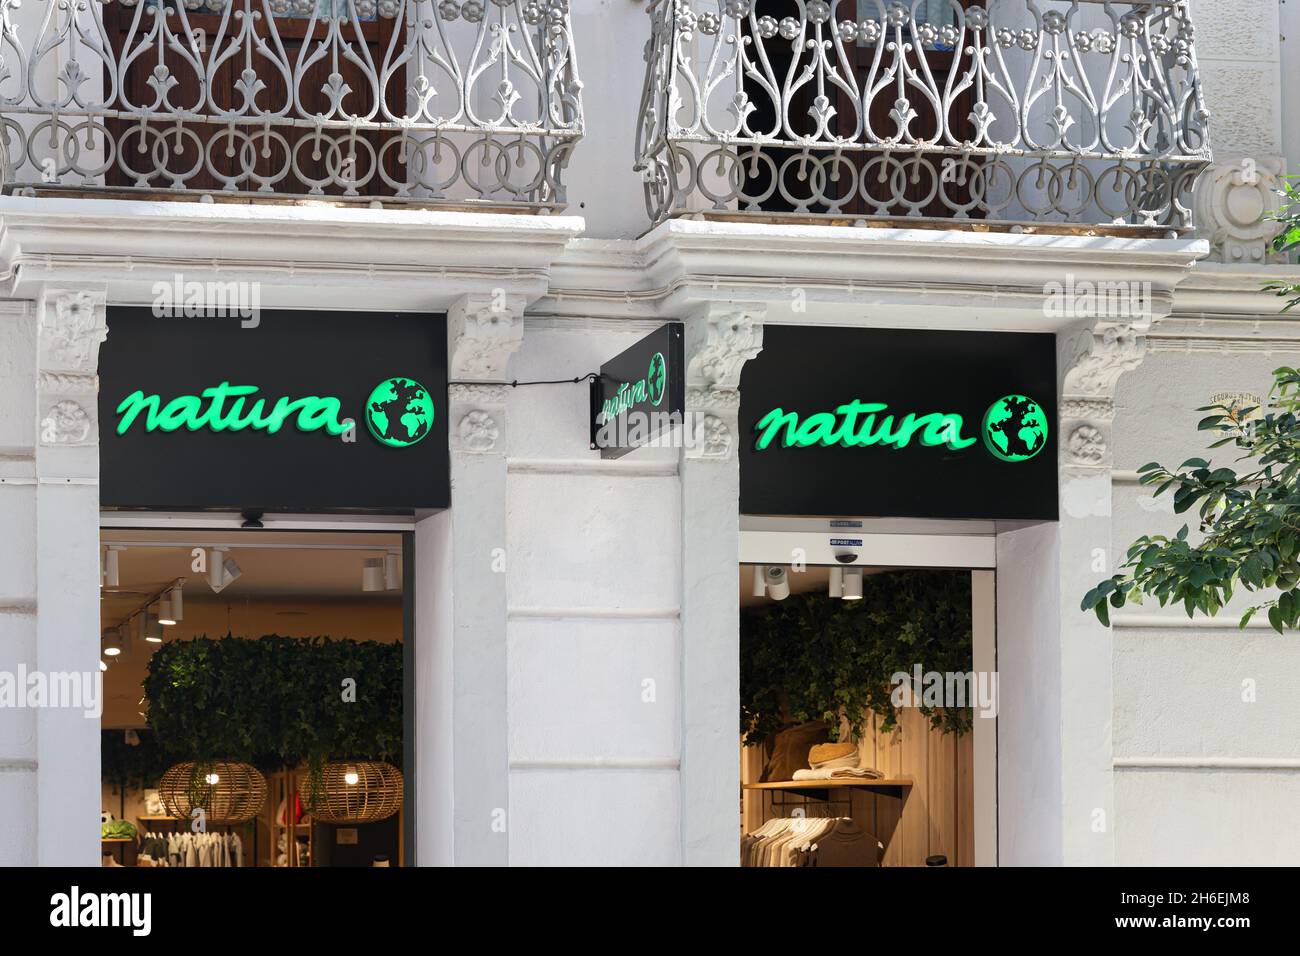 VALENCIA, SPAIN - NOVEMBER 15, 2021: Natura is a store specializing in clothing, household items, travel items or gift and wellness items Stock Photo